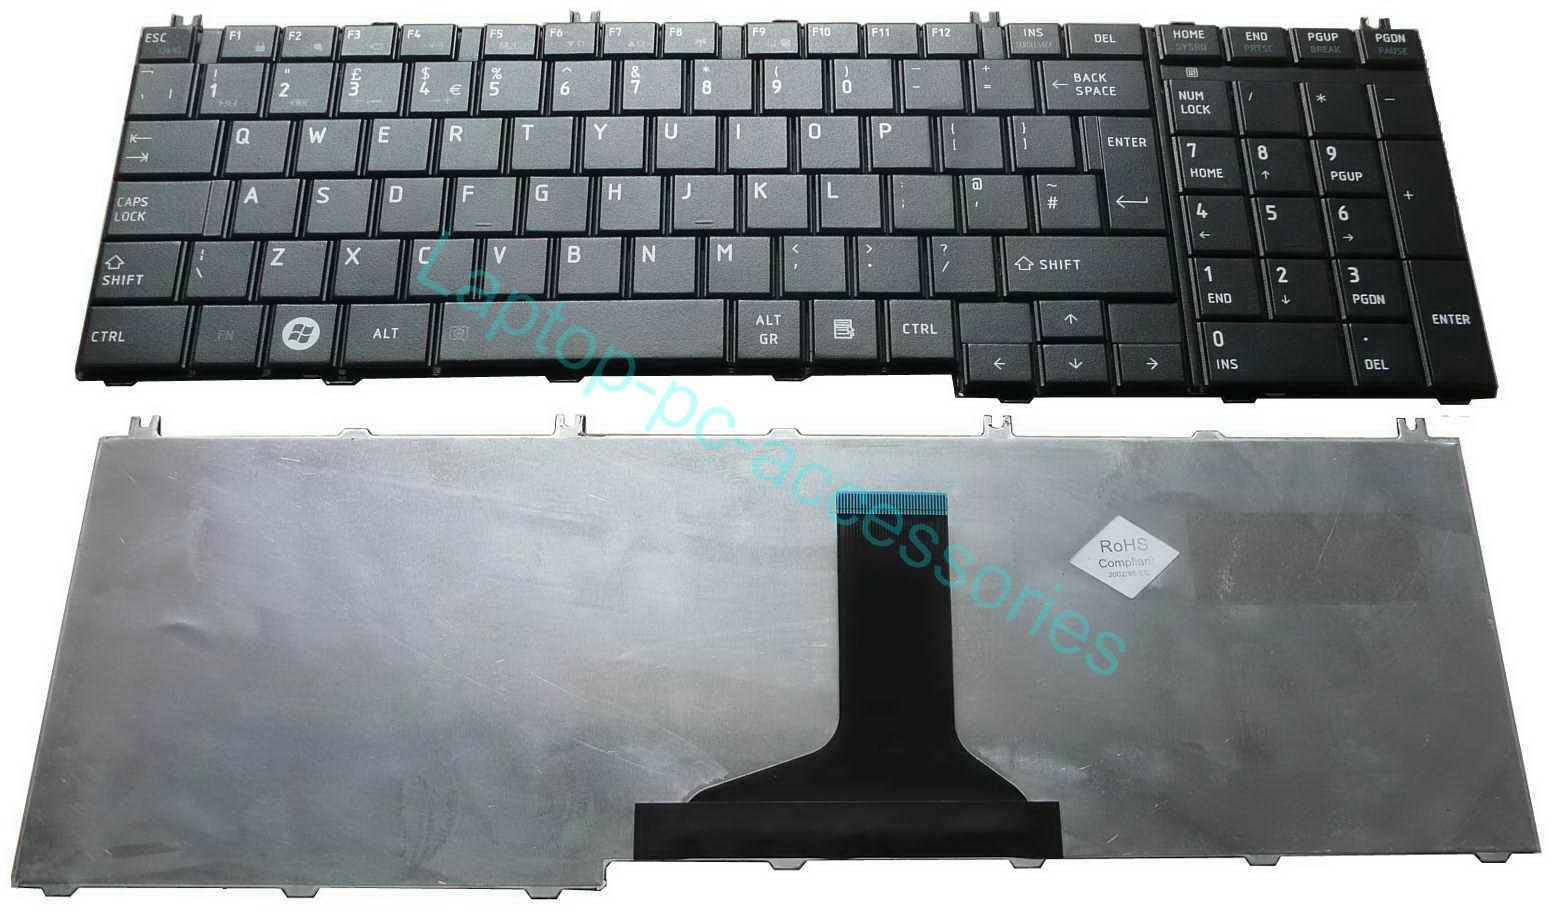 New For Toshiba Satellite L655 L655D L650 L650D Keyboard UK Black Teclado Series Laptop Notebook Accessories Replacement Parts Wholesale QWERTY